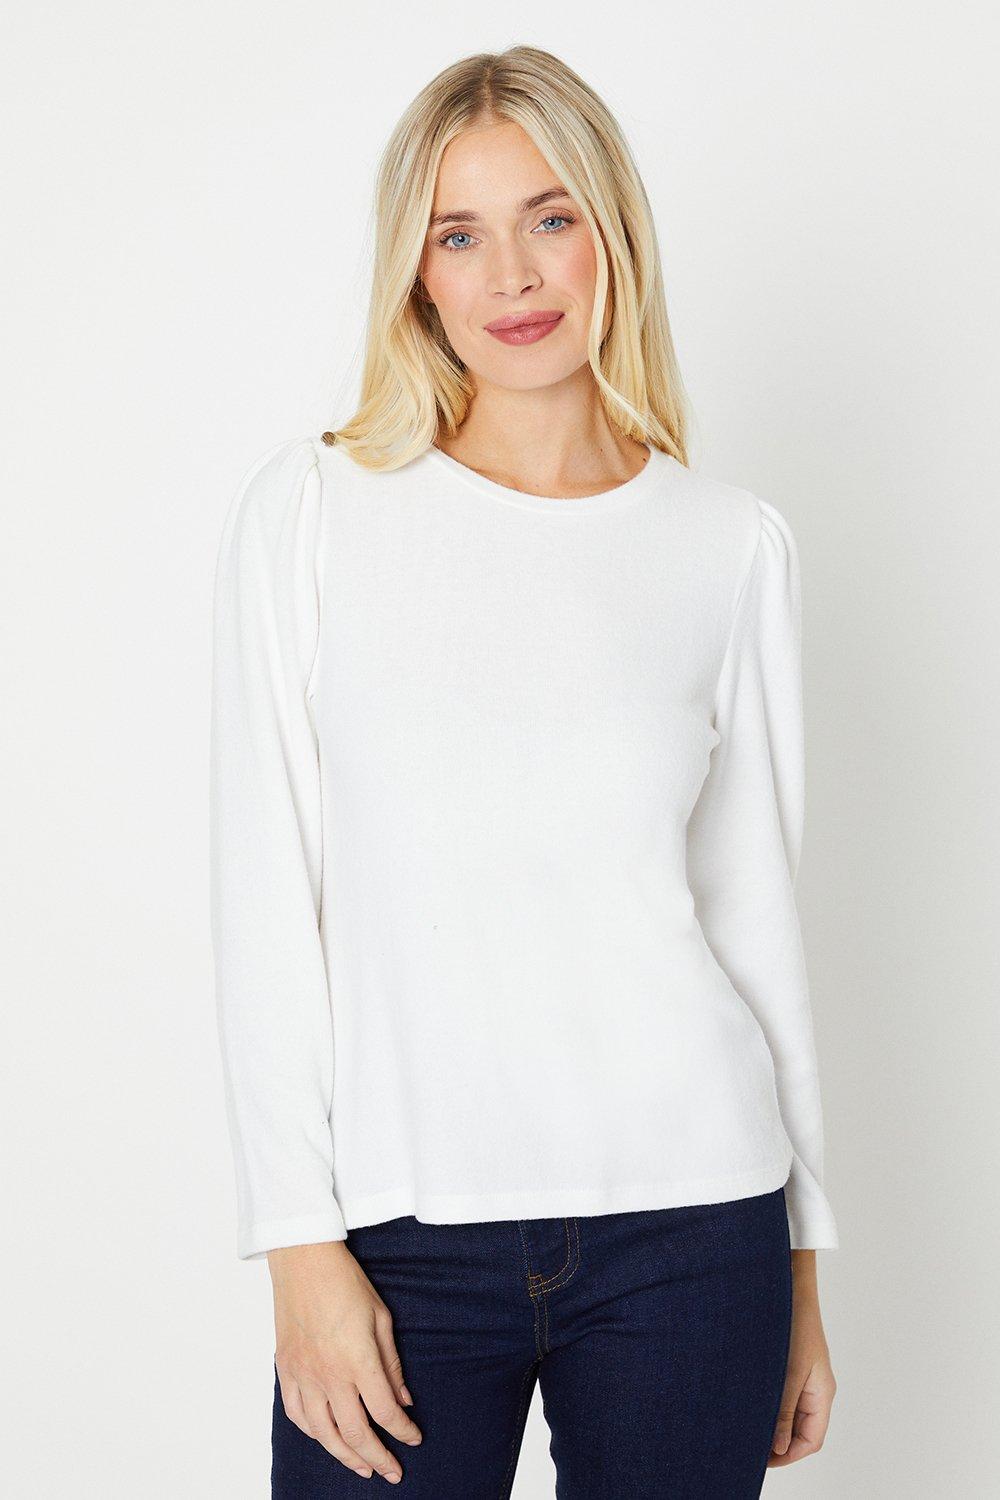 Women’s Petite Diamonte Button Shoulder Brushed Long Sleeve Top - ivory - S